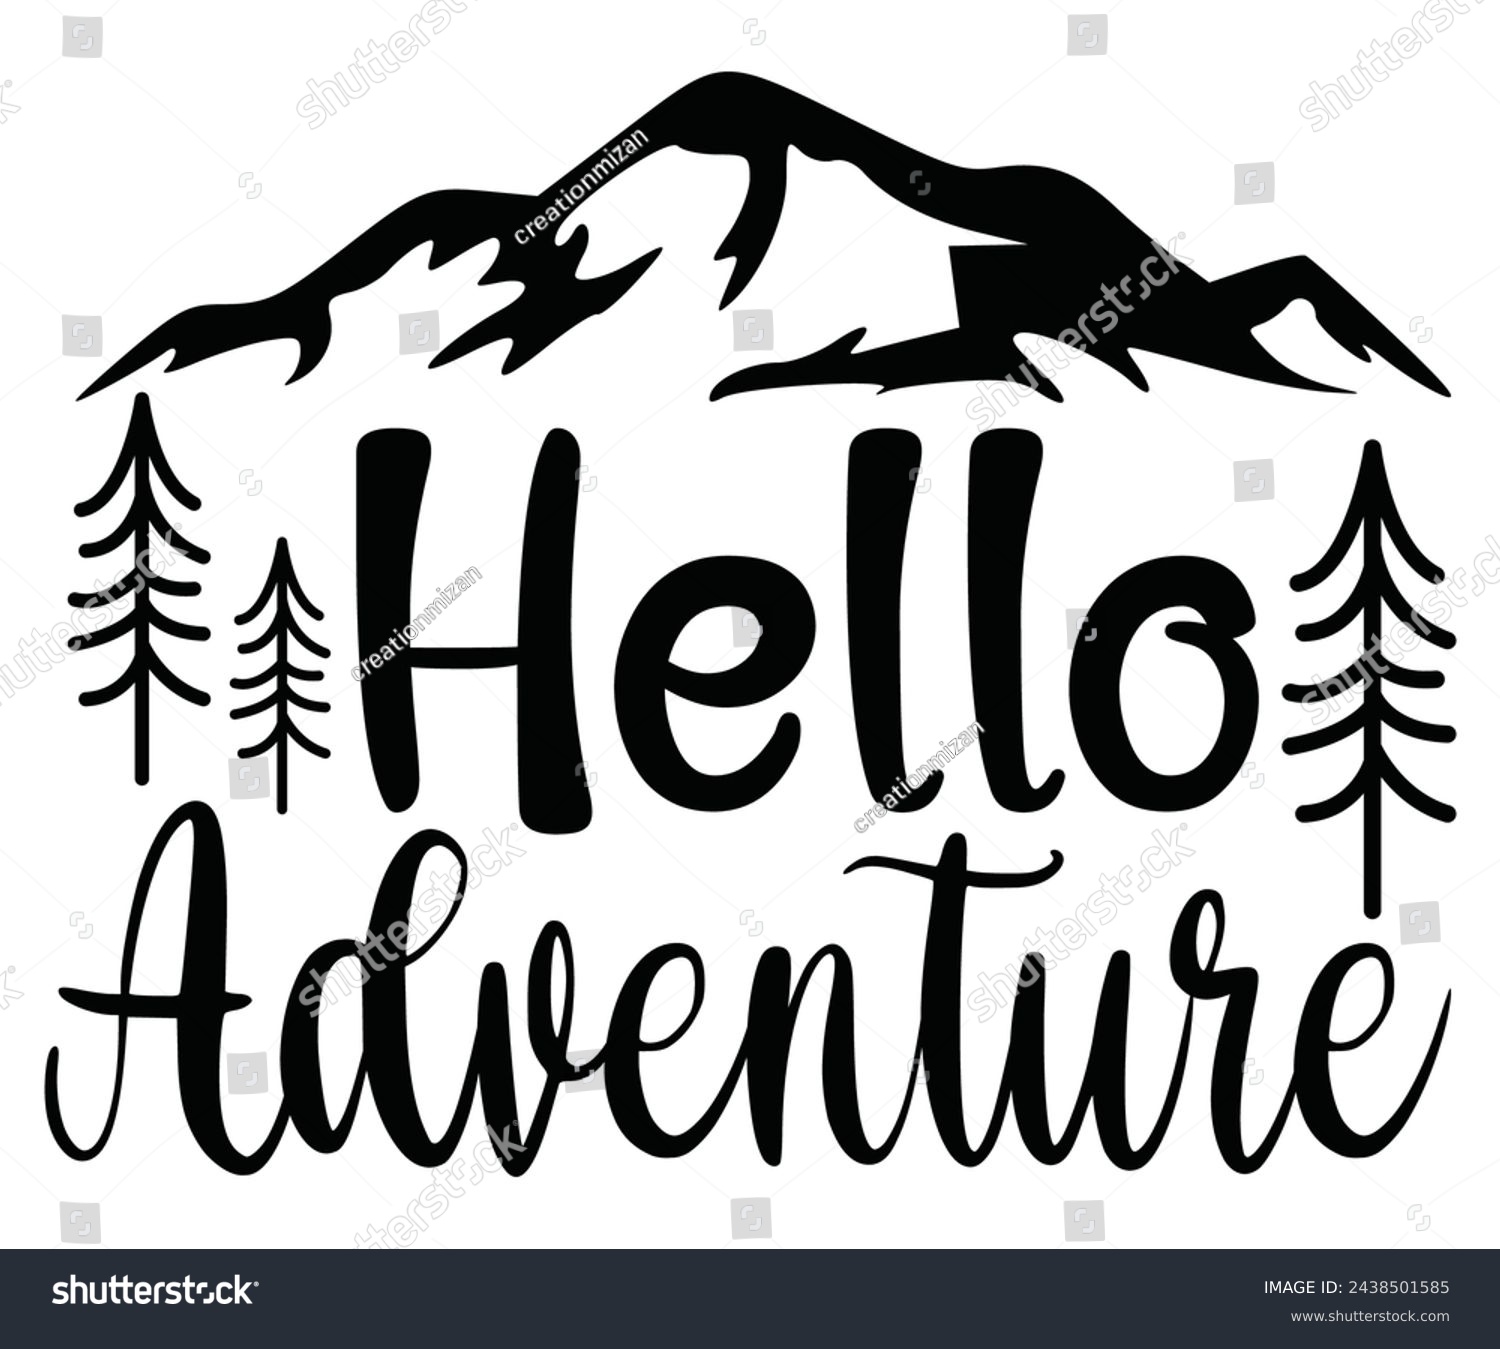 SVG of hello Apparently Svg,Camping Svg,Hiking,Funny Camping,Adventure,Summer Camp,Happy Camper,Camp Life,Camp Saying,Camping Shirt svg